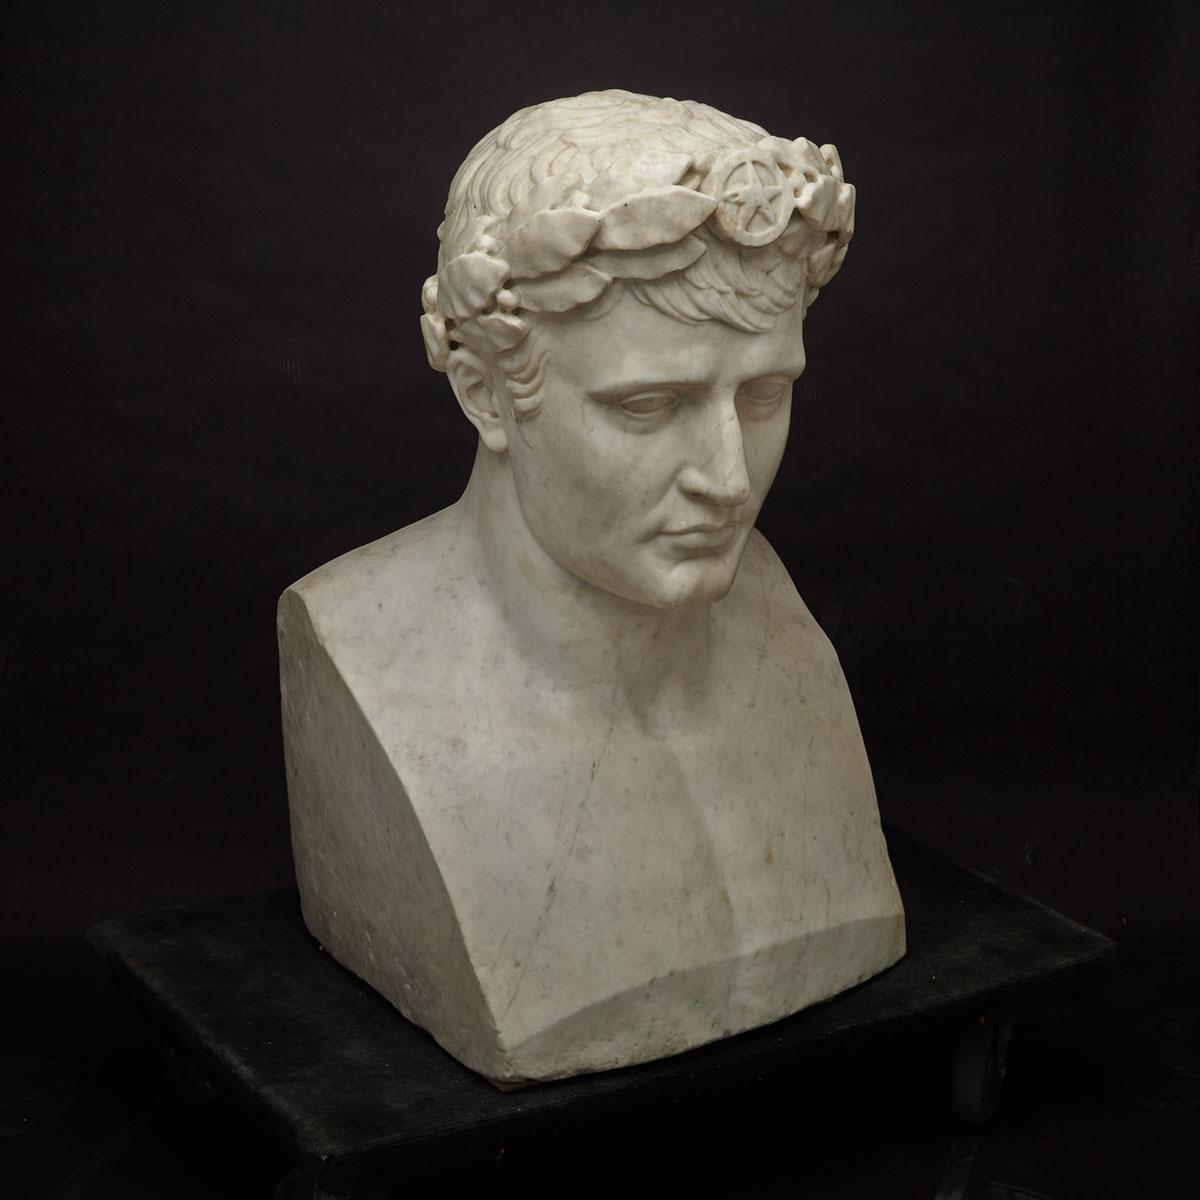 Large French White Marble Bust of Napoleon I, Emperor, 19th century